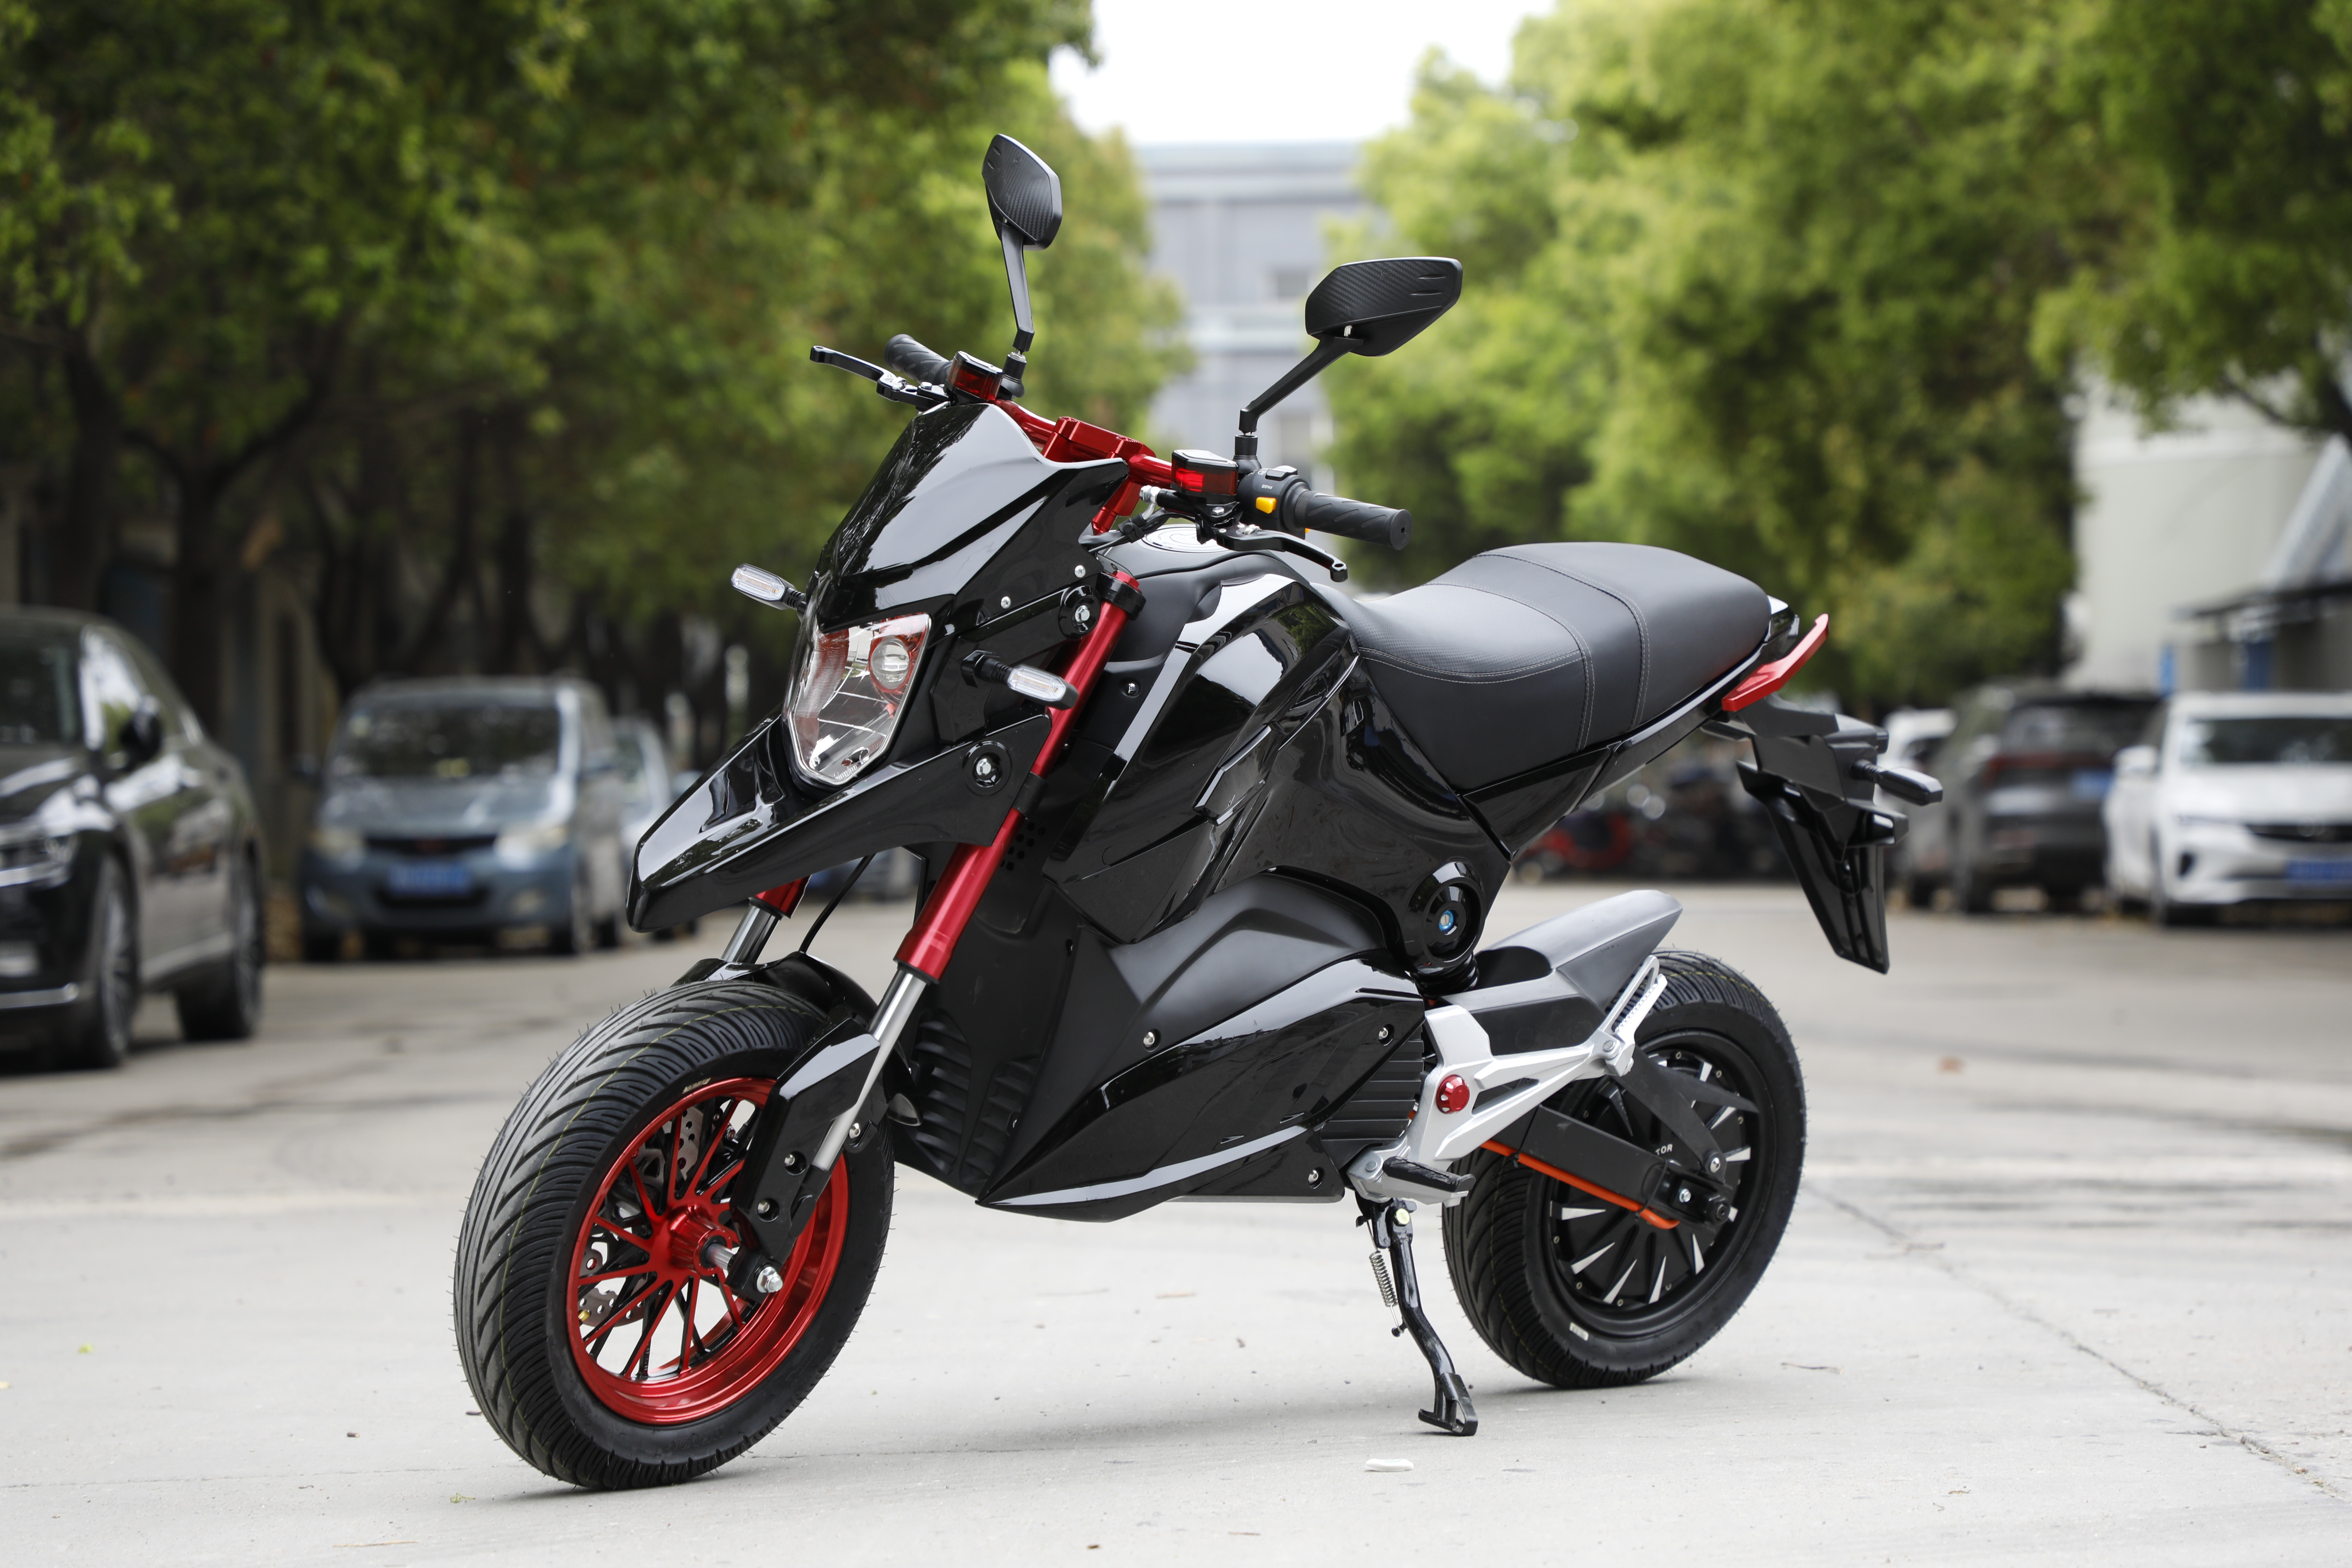 Exploring the Power of Electric Motorcycles on High-Speed Roads